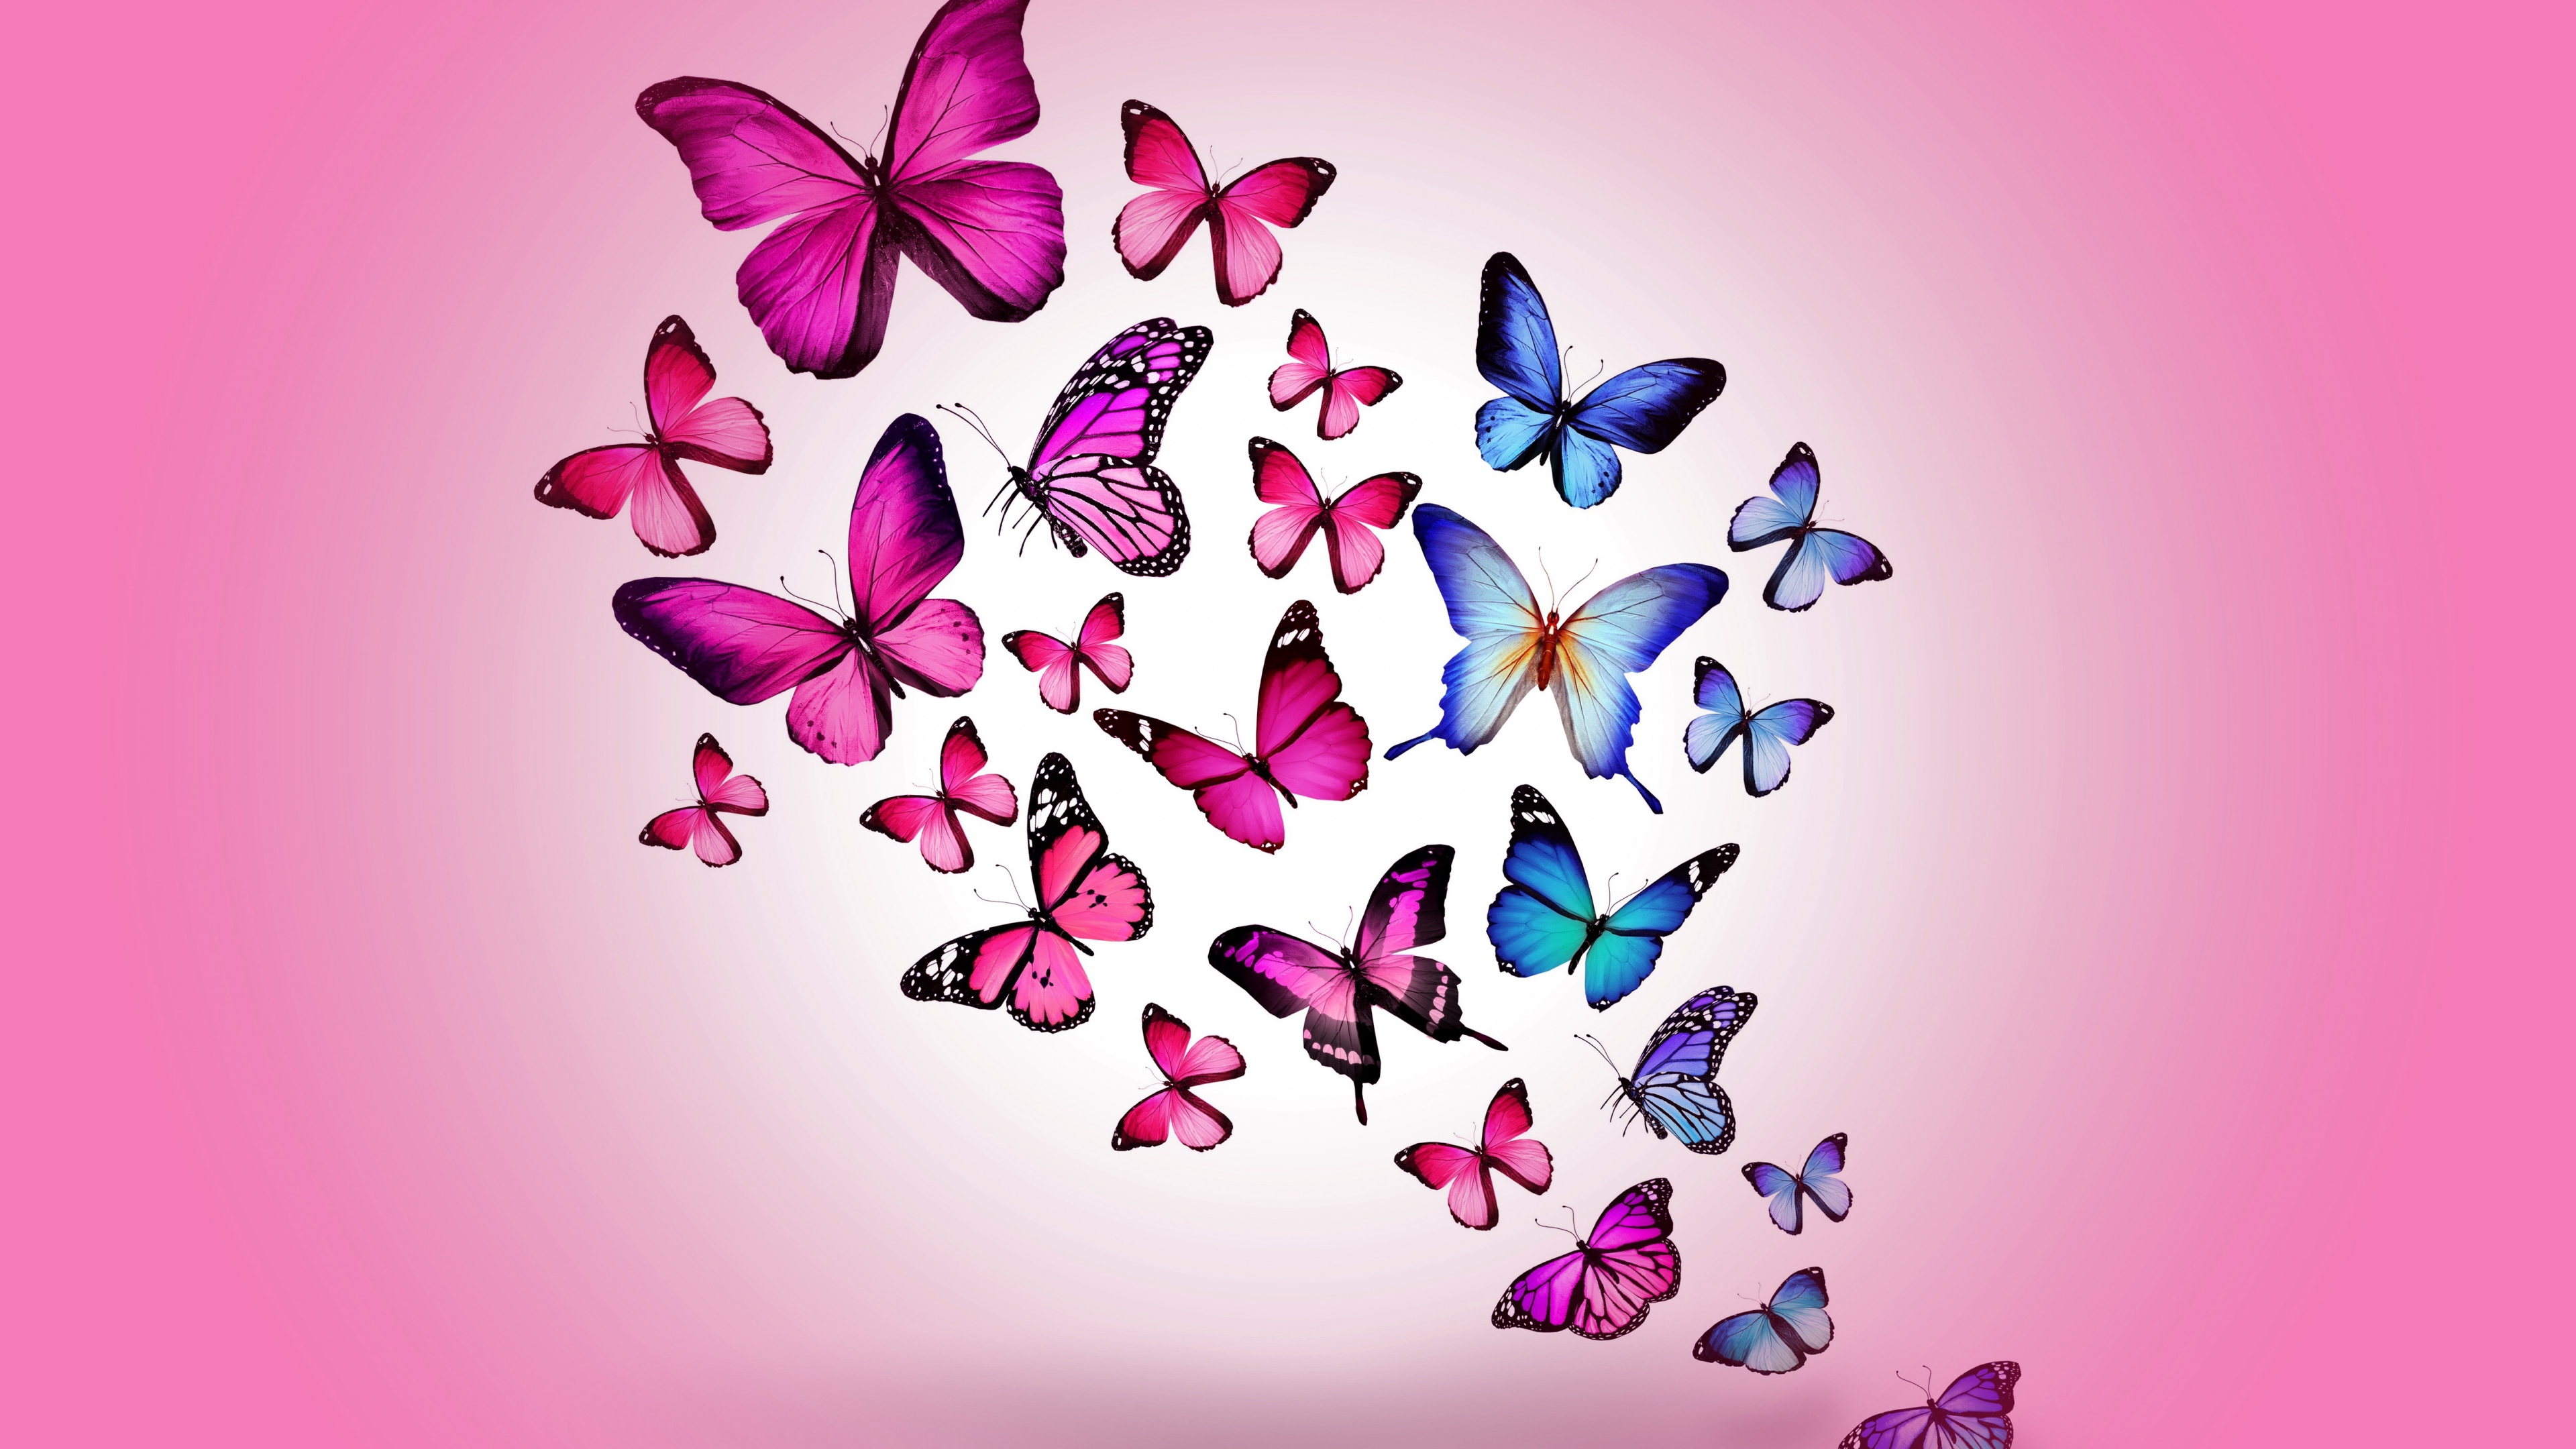 Butterfly Backgrounds free download